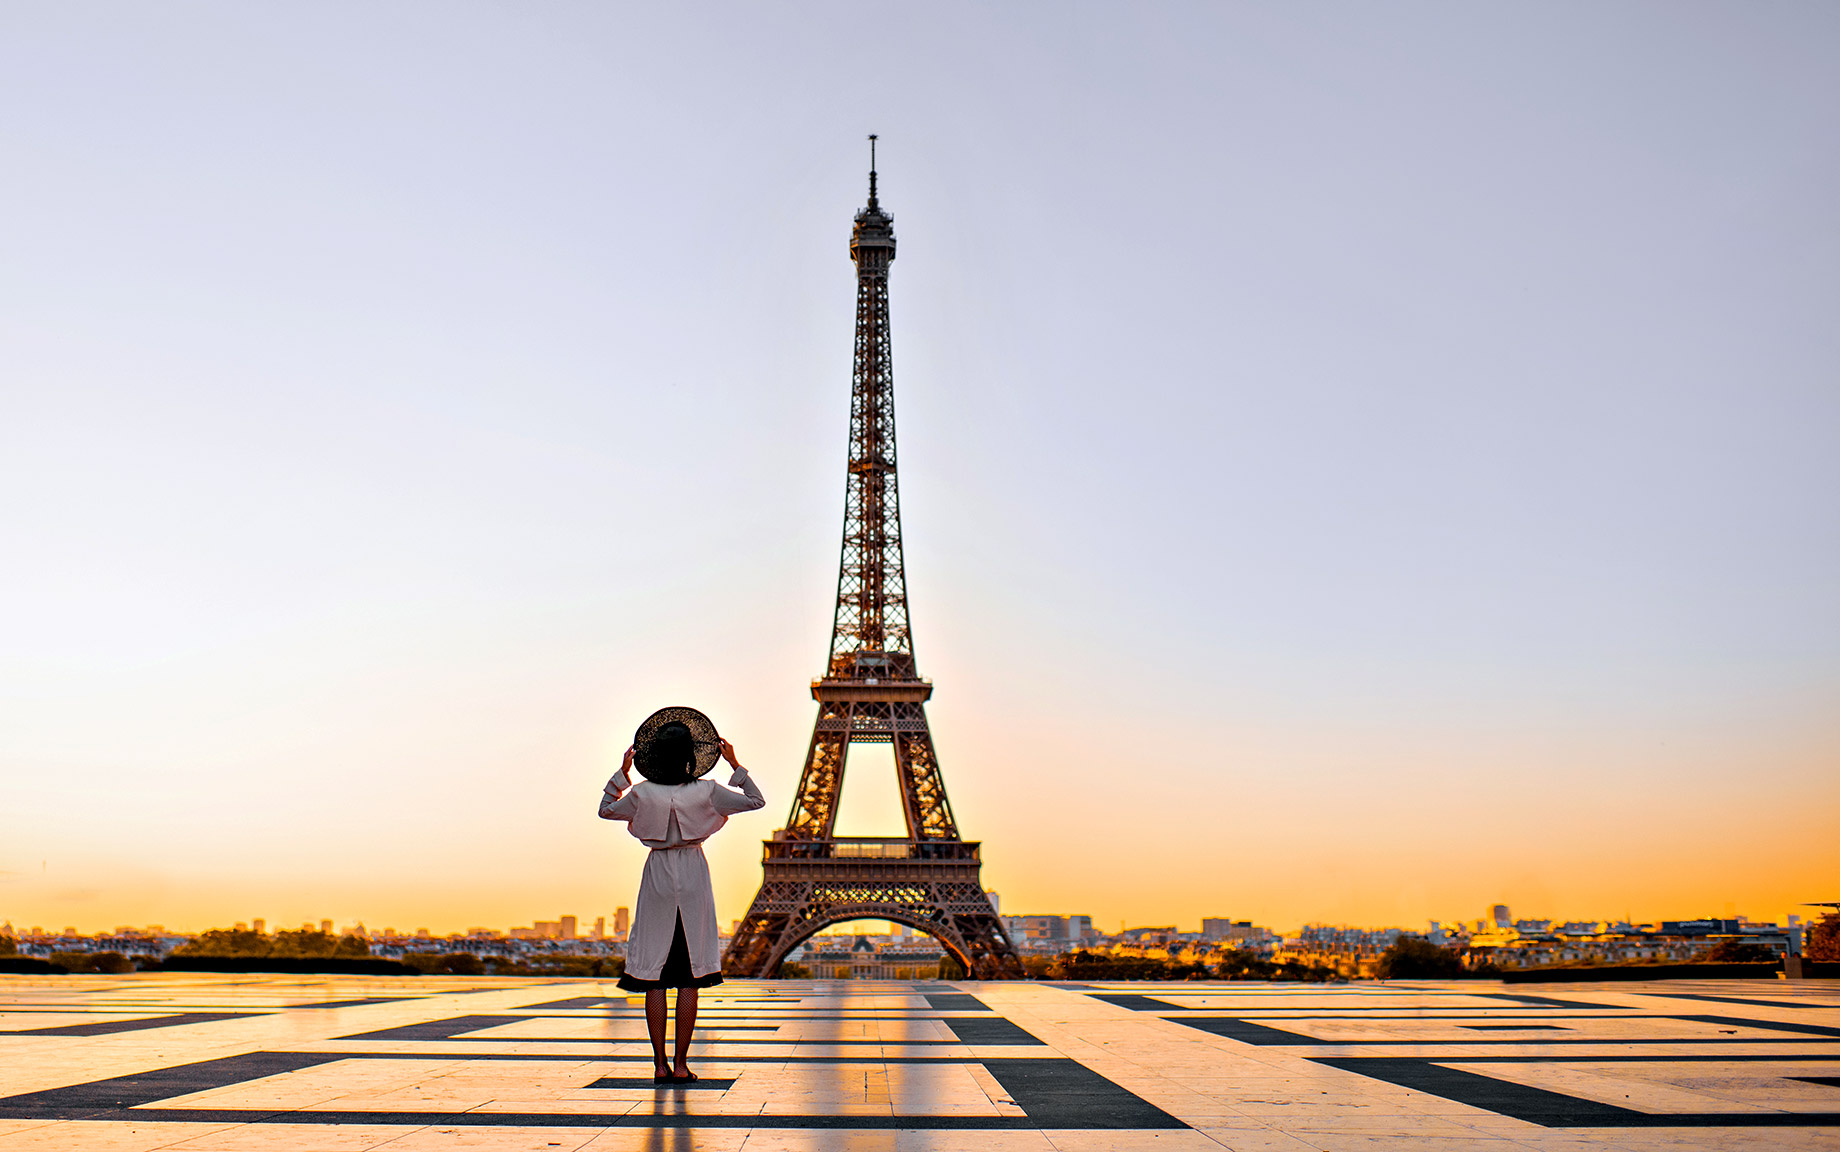 A Woman Enjoying a Sunset View of the Eiffel Tower in Paris, France